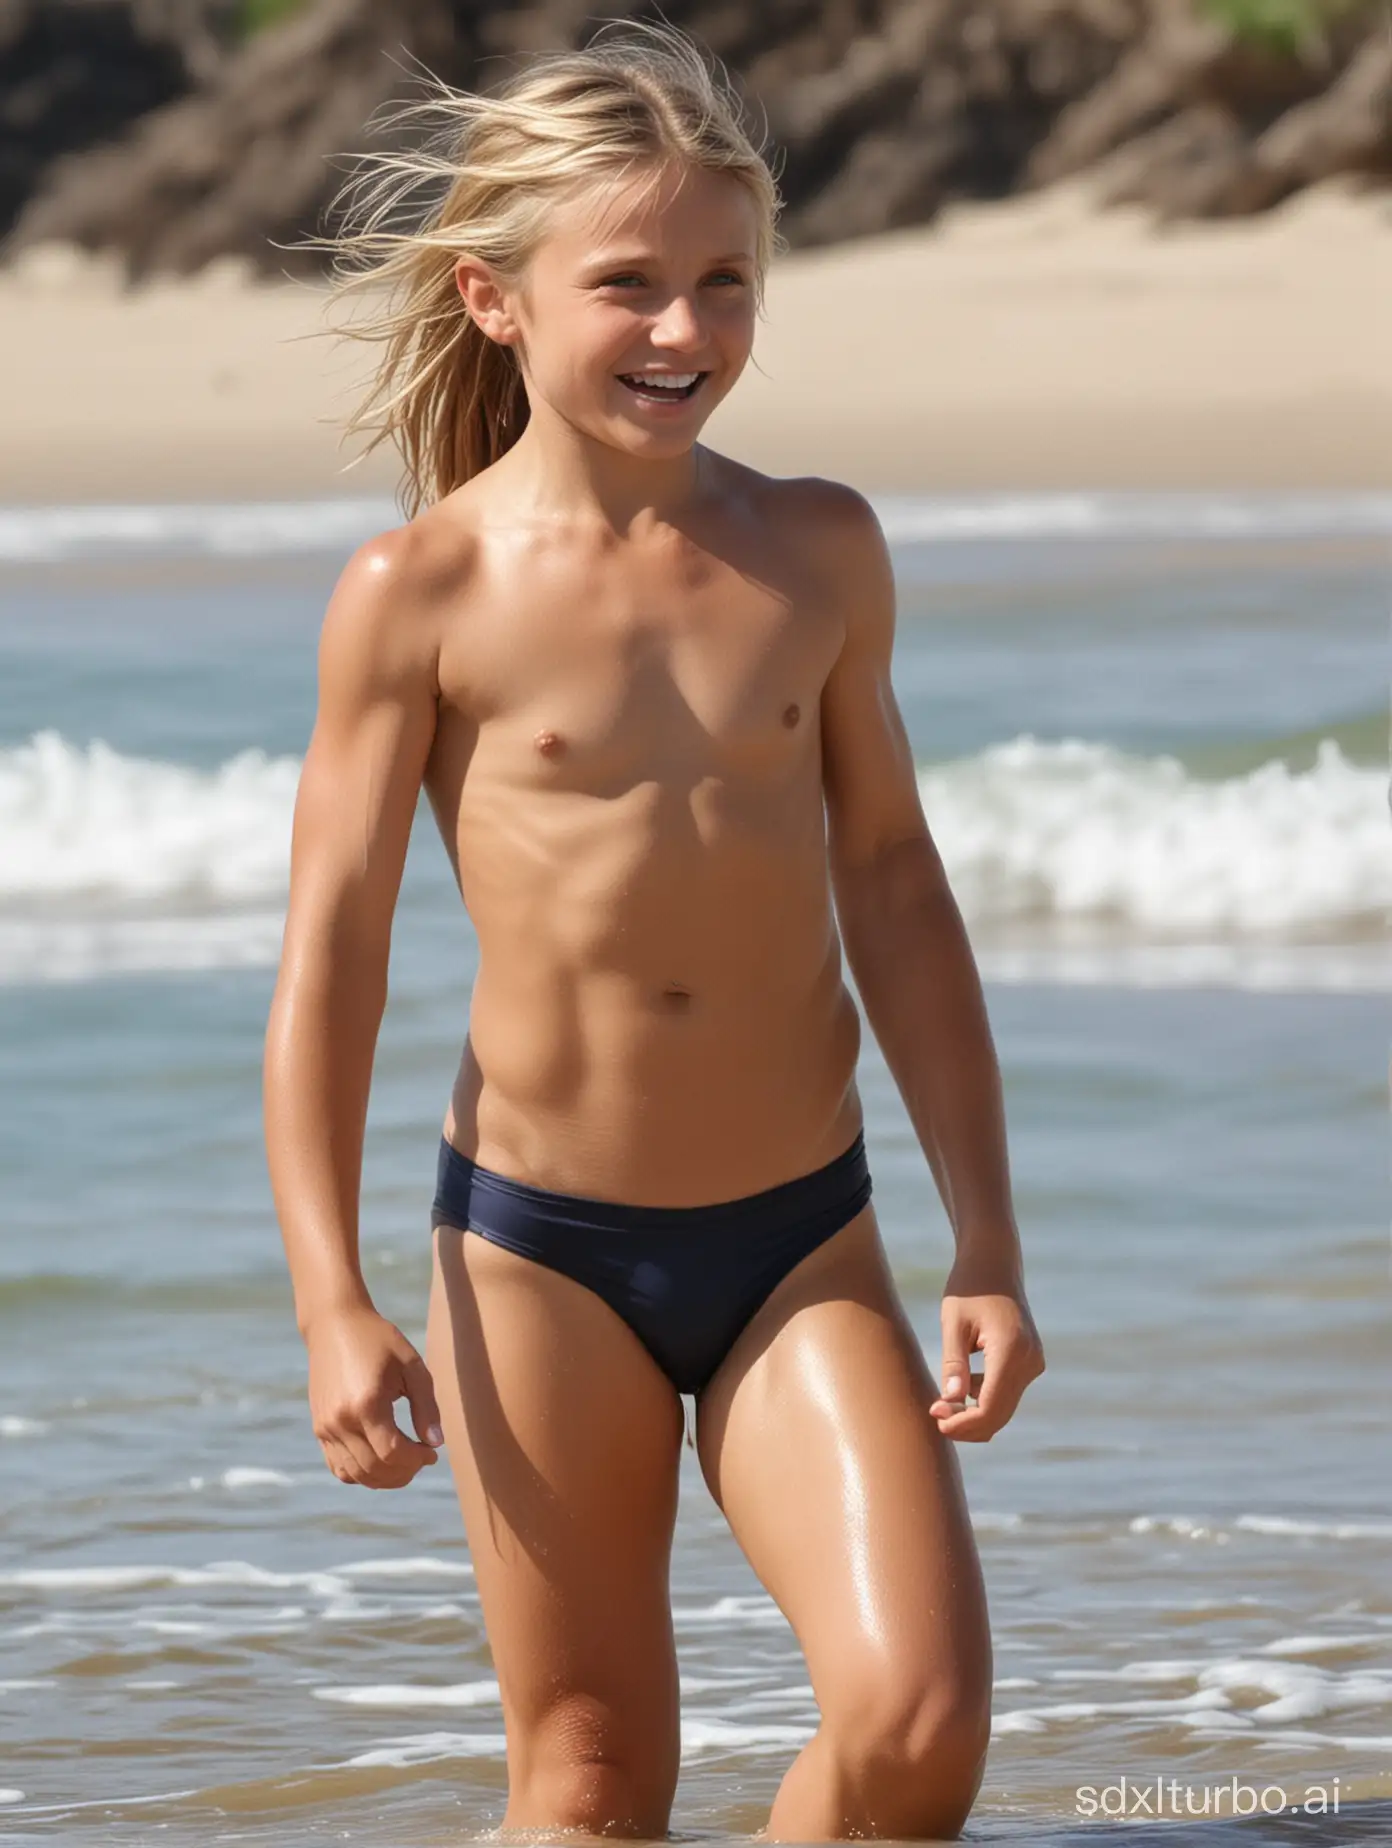 Cameron Diaz at 8 years old, muscular abs, at beach